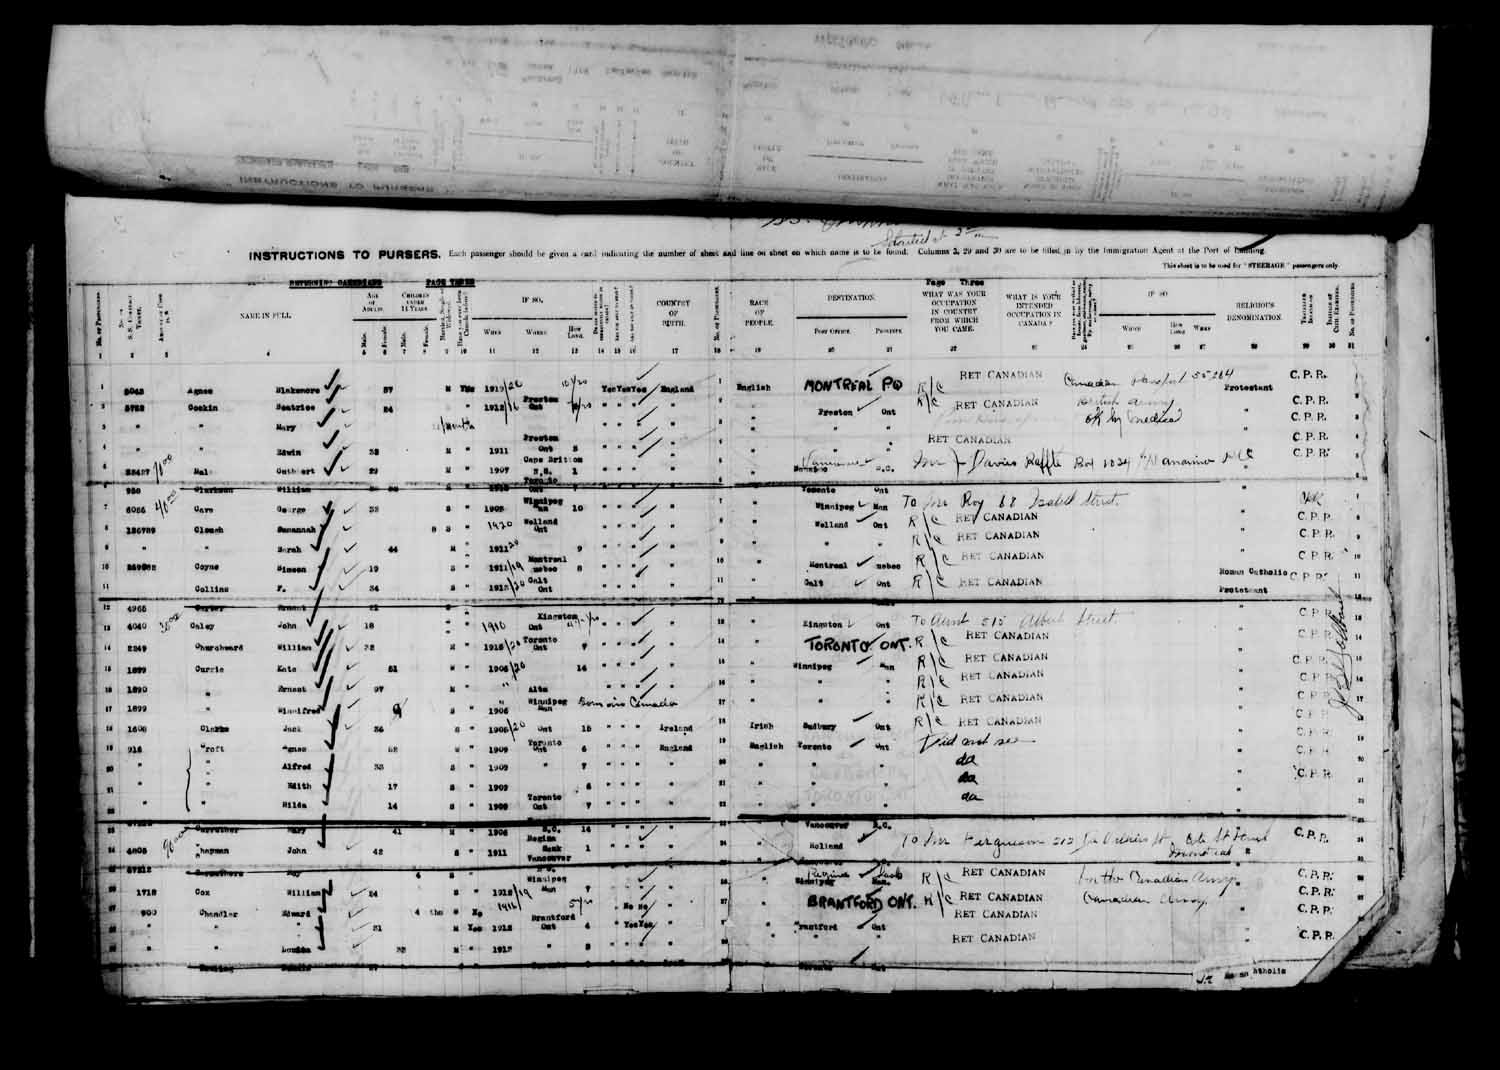 Digitized page of Passenger Lists for Image No.: e003610630